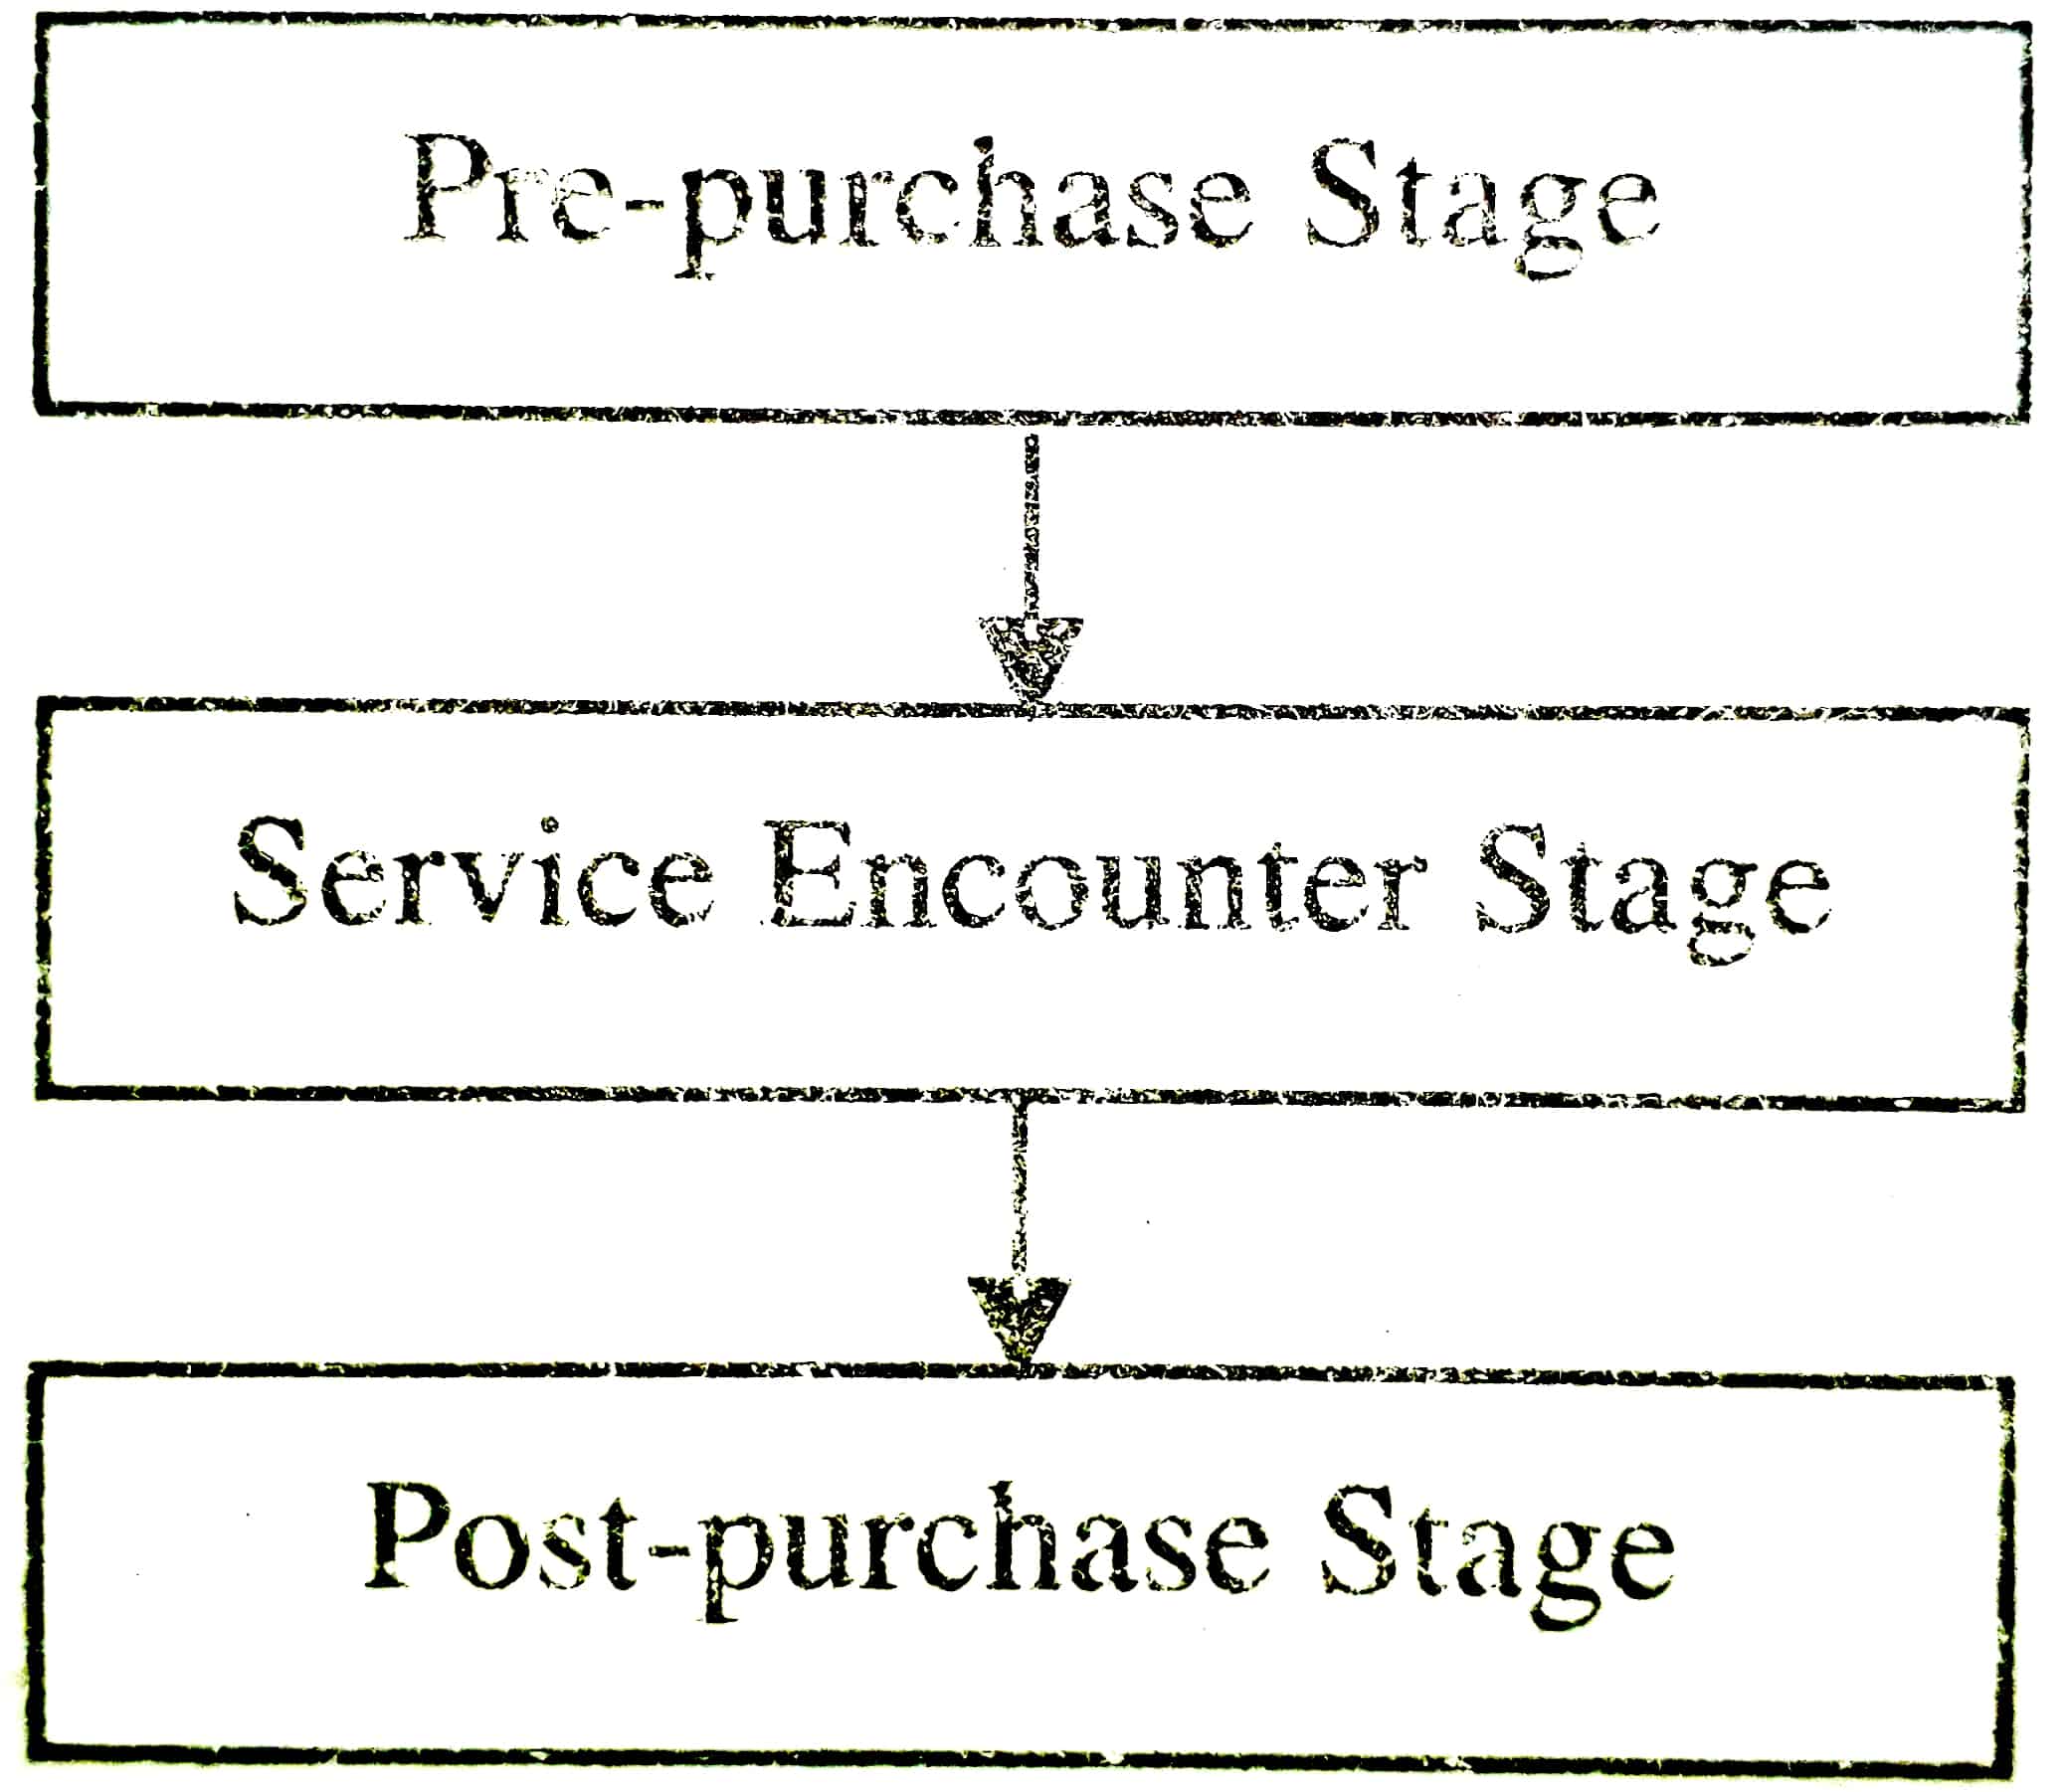 Customer Decision-Making Process-Model of Service Consumption